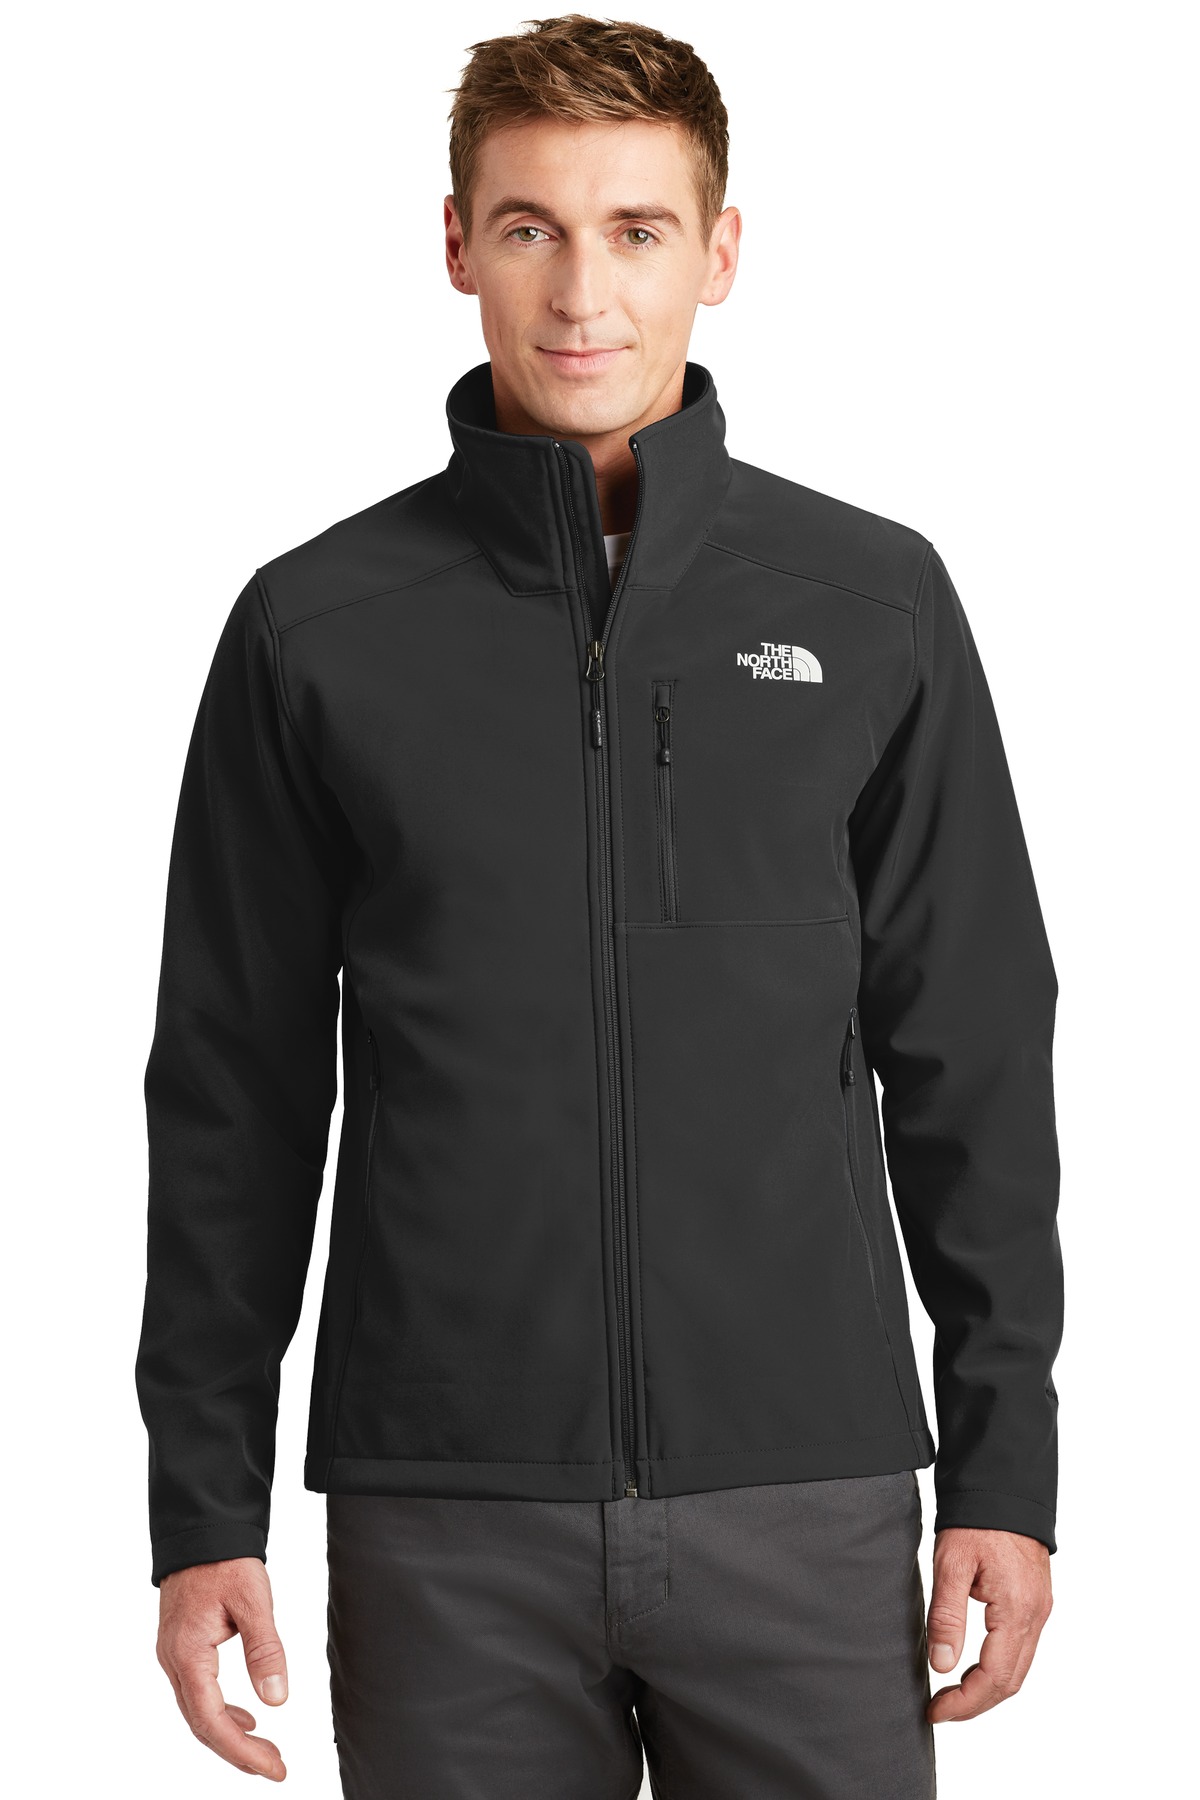 The North Face Apex Barrier Soft Shell Jacket-The North Face